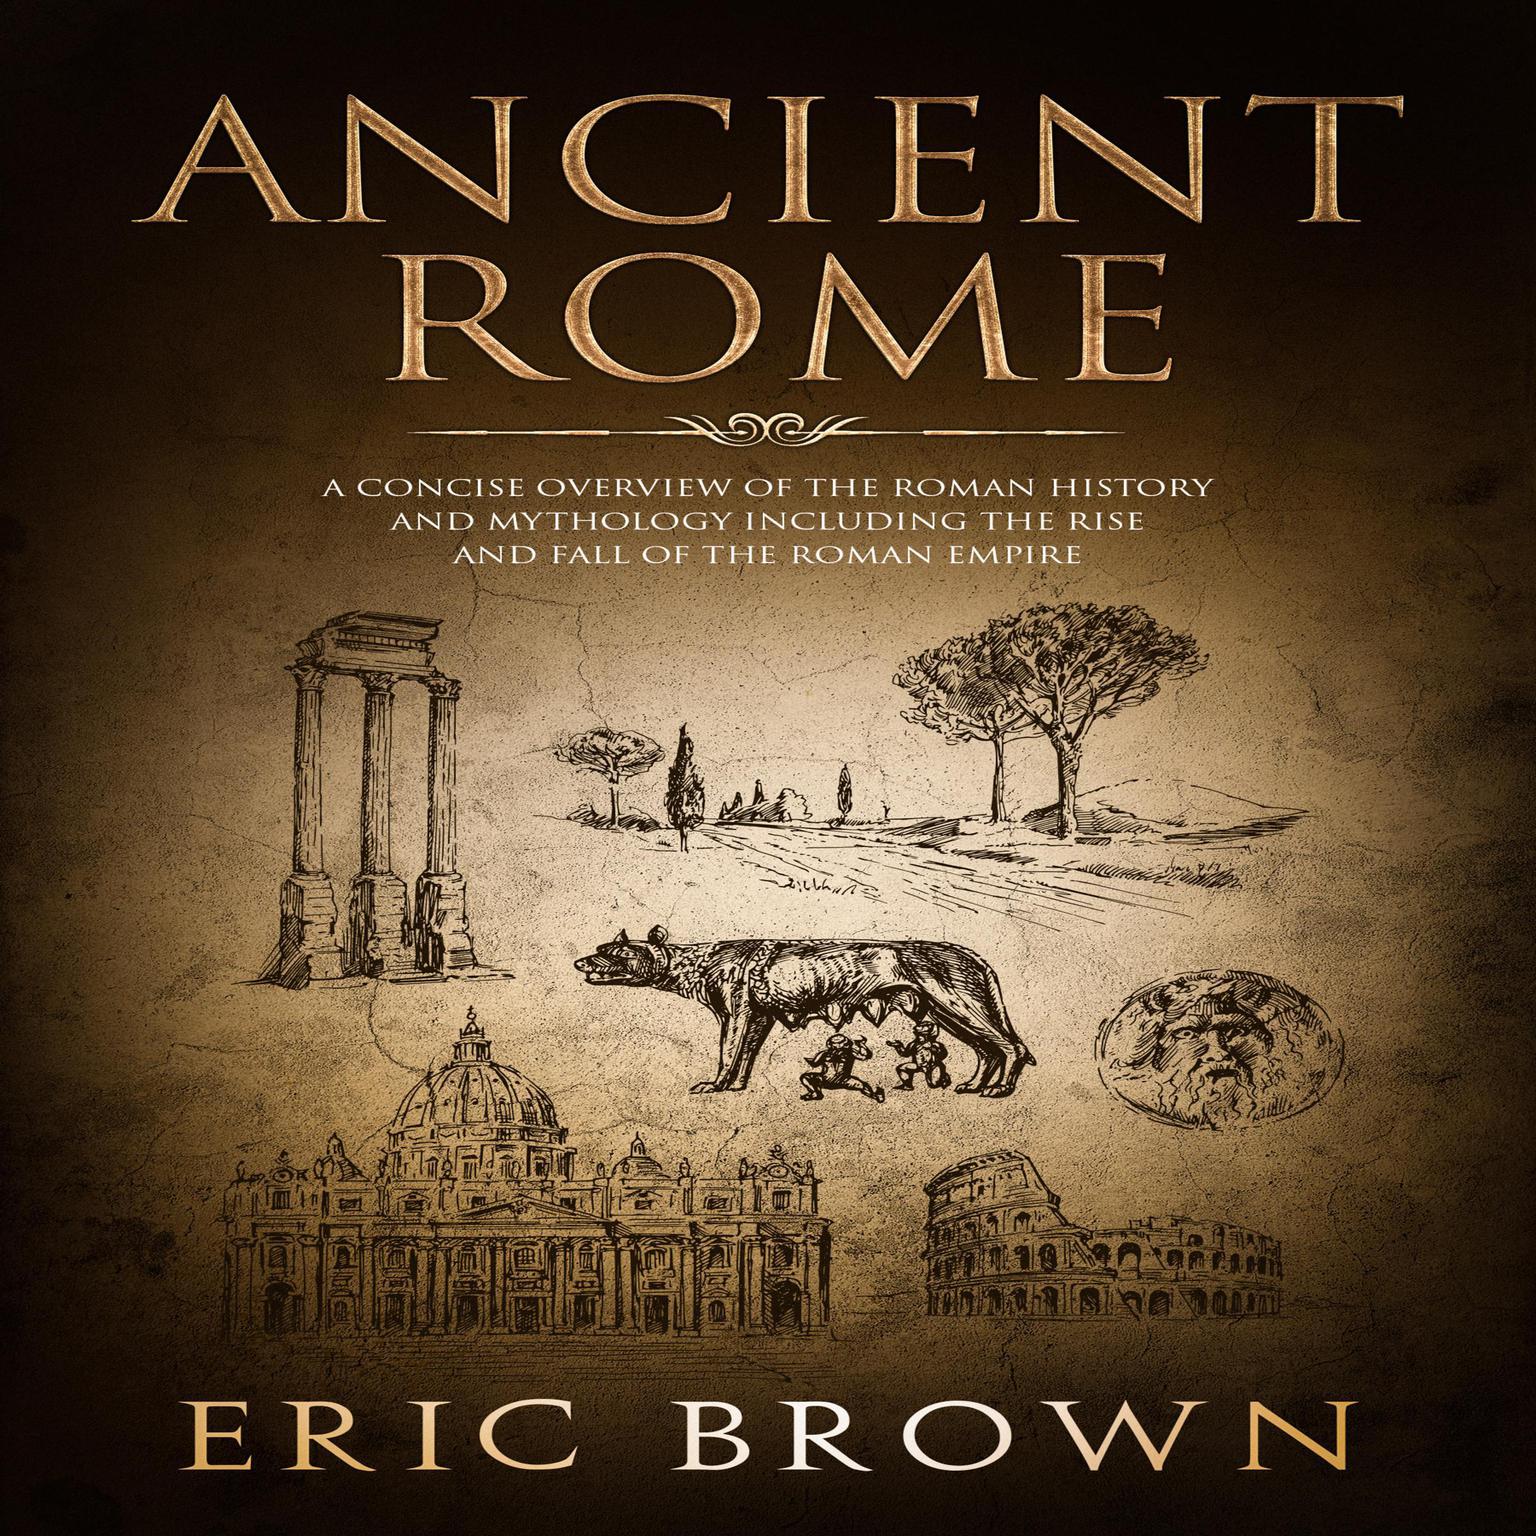 Ancient Rome: A Concise Overview of the Roman History and Mythology Including the Rise and Fall of the Roman Empire Audiobook, by Eric Brown